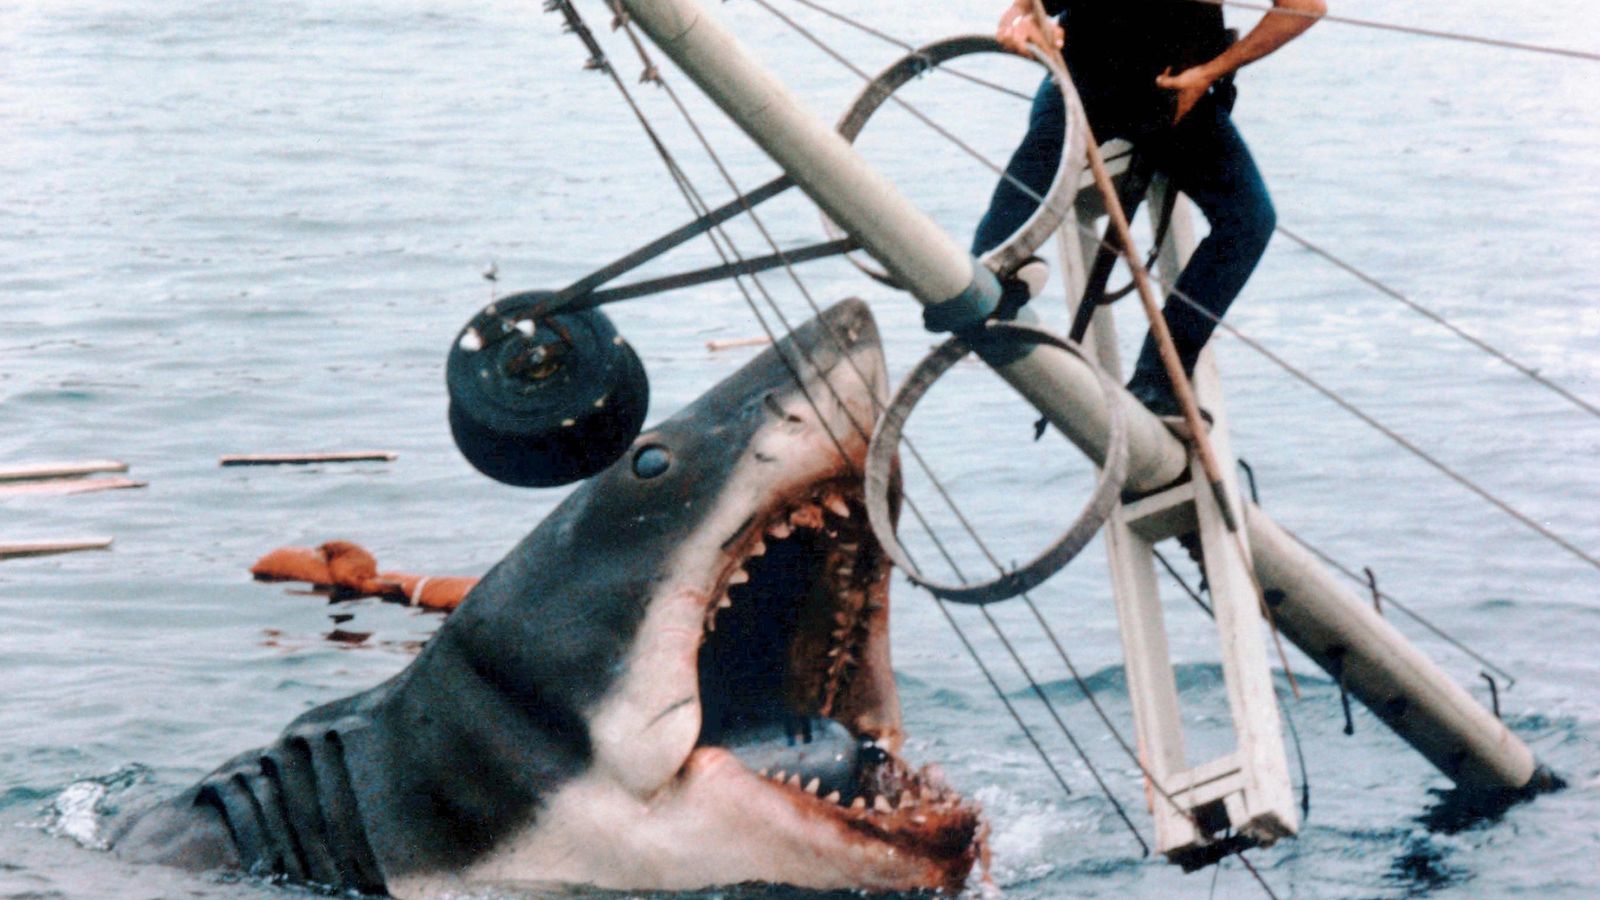 Steven Spielberg reveals Jaws 'regret' - and fears sharks could be 'mad' at him